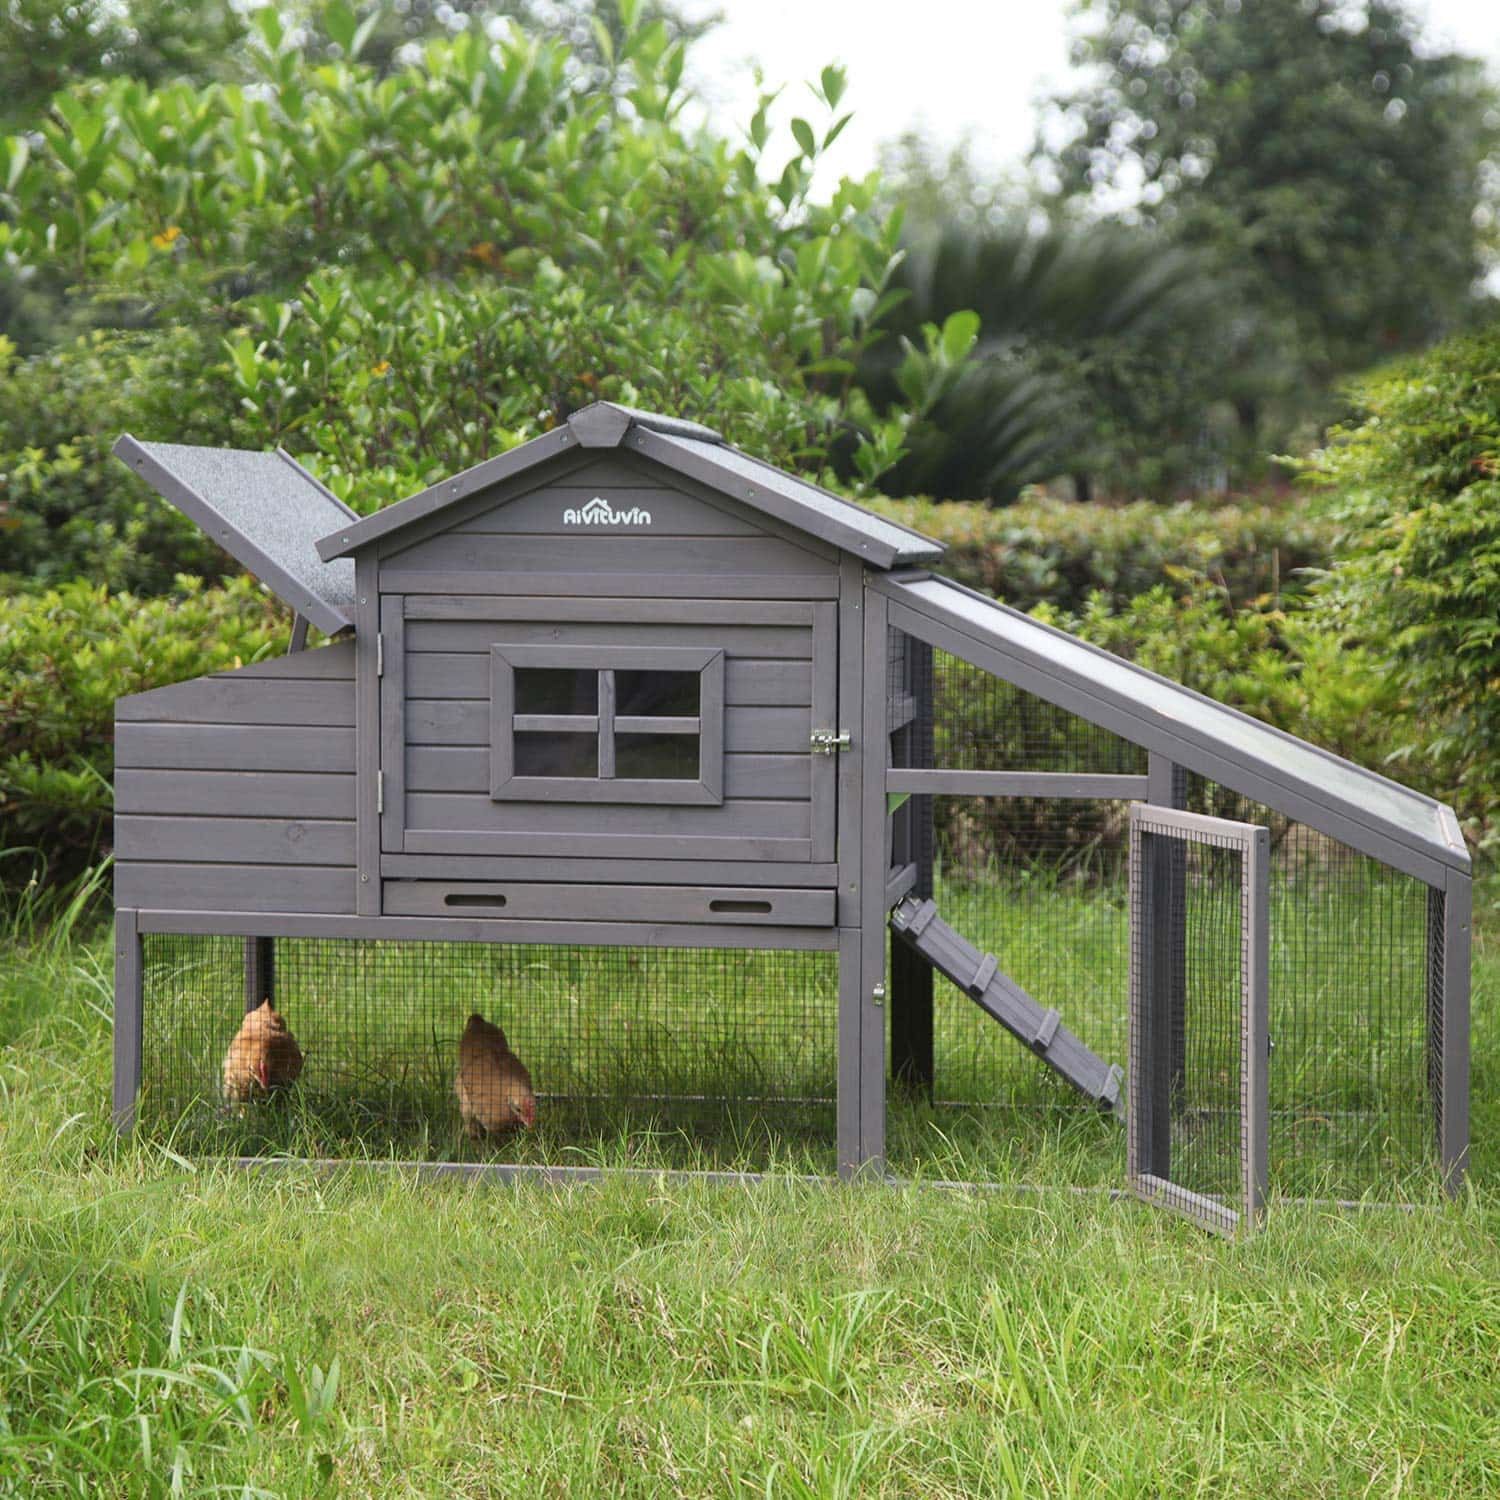 Aivituvin 69in Wooden Chicken Coop, Outdoor Large Hen House with Nest Box Poultry Cage, Rabbit Hutch - Waterproof UV Panel